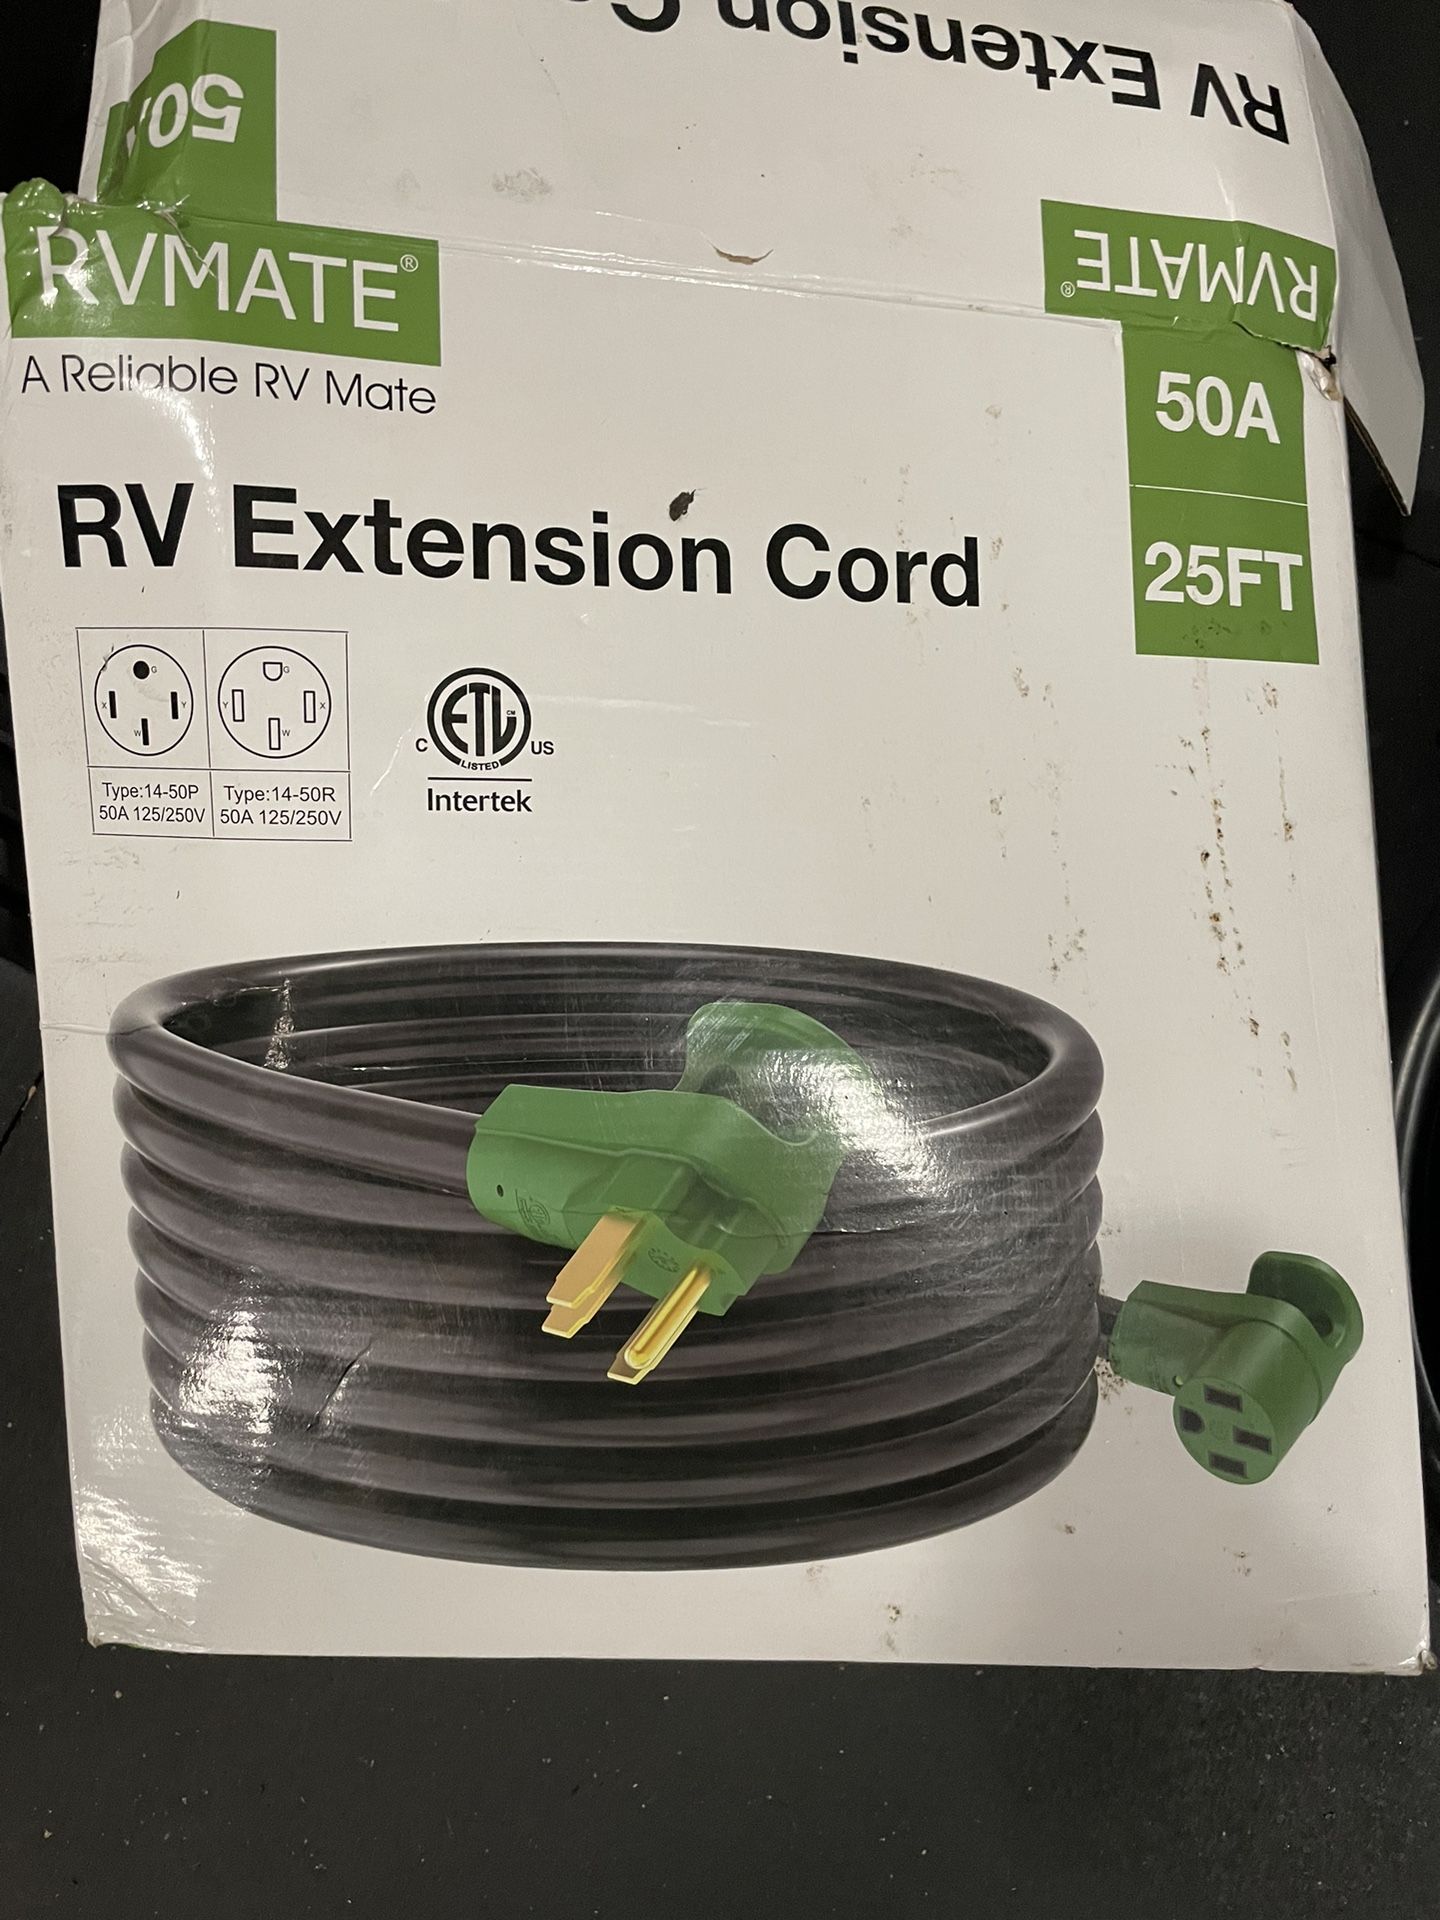 25 FT RV Extension Cord